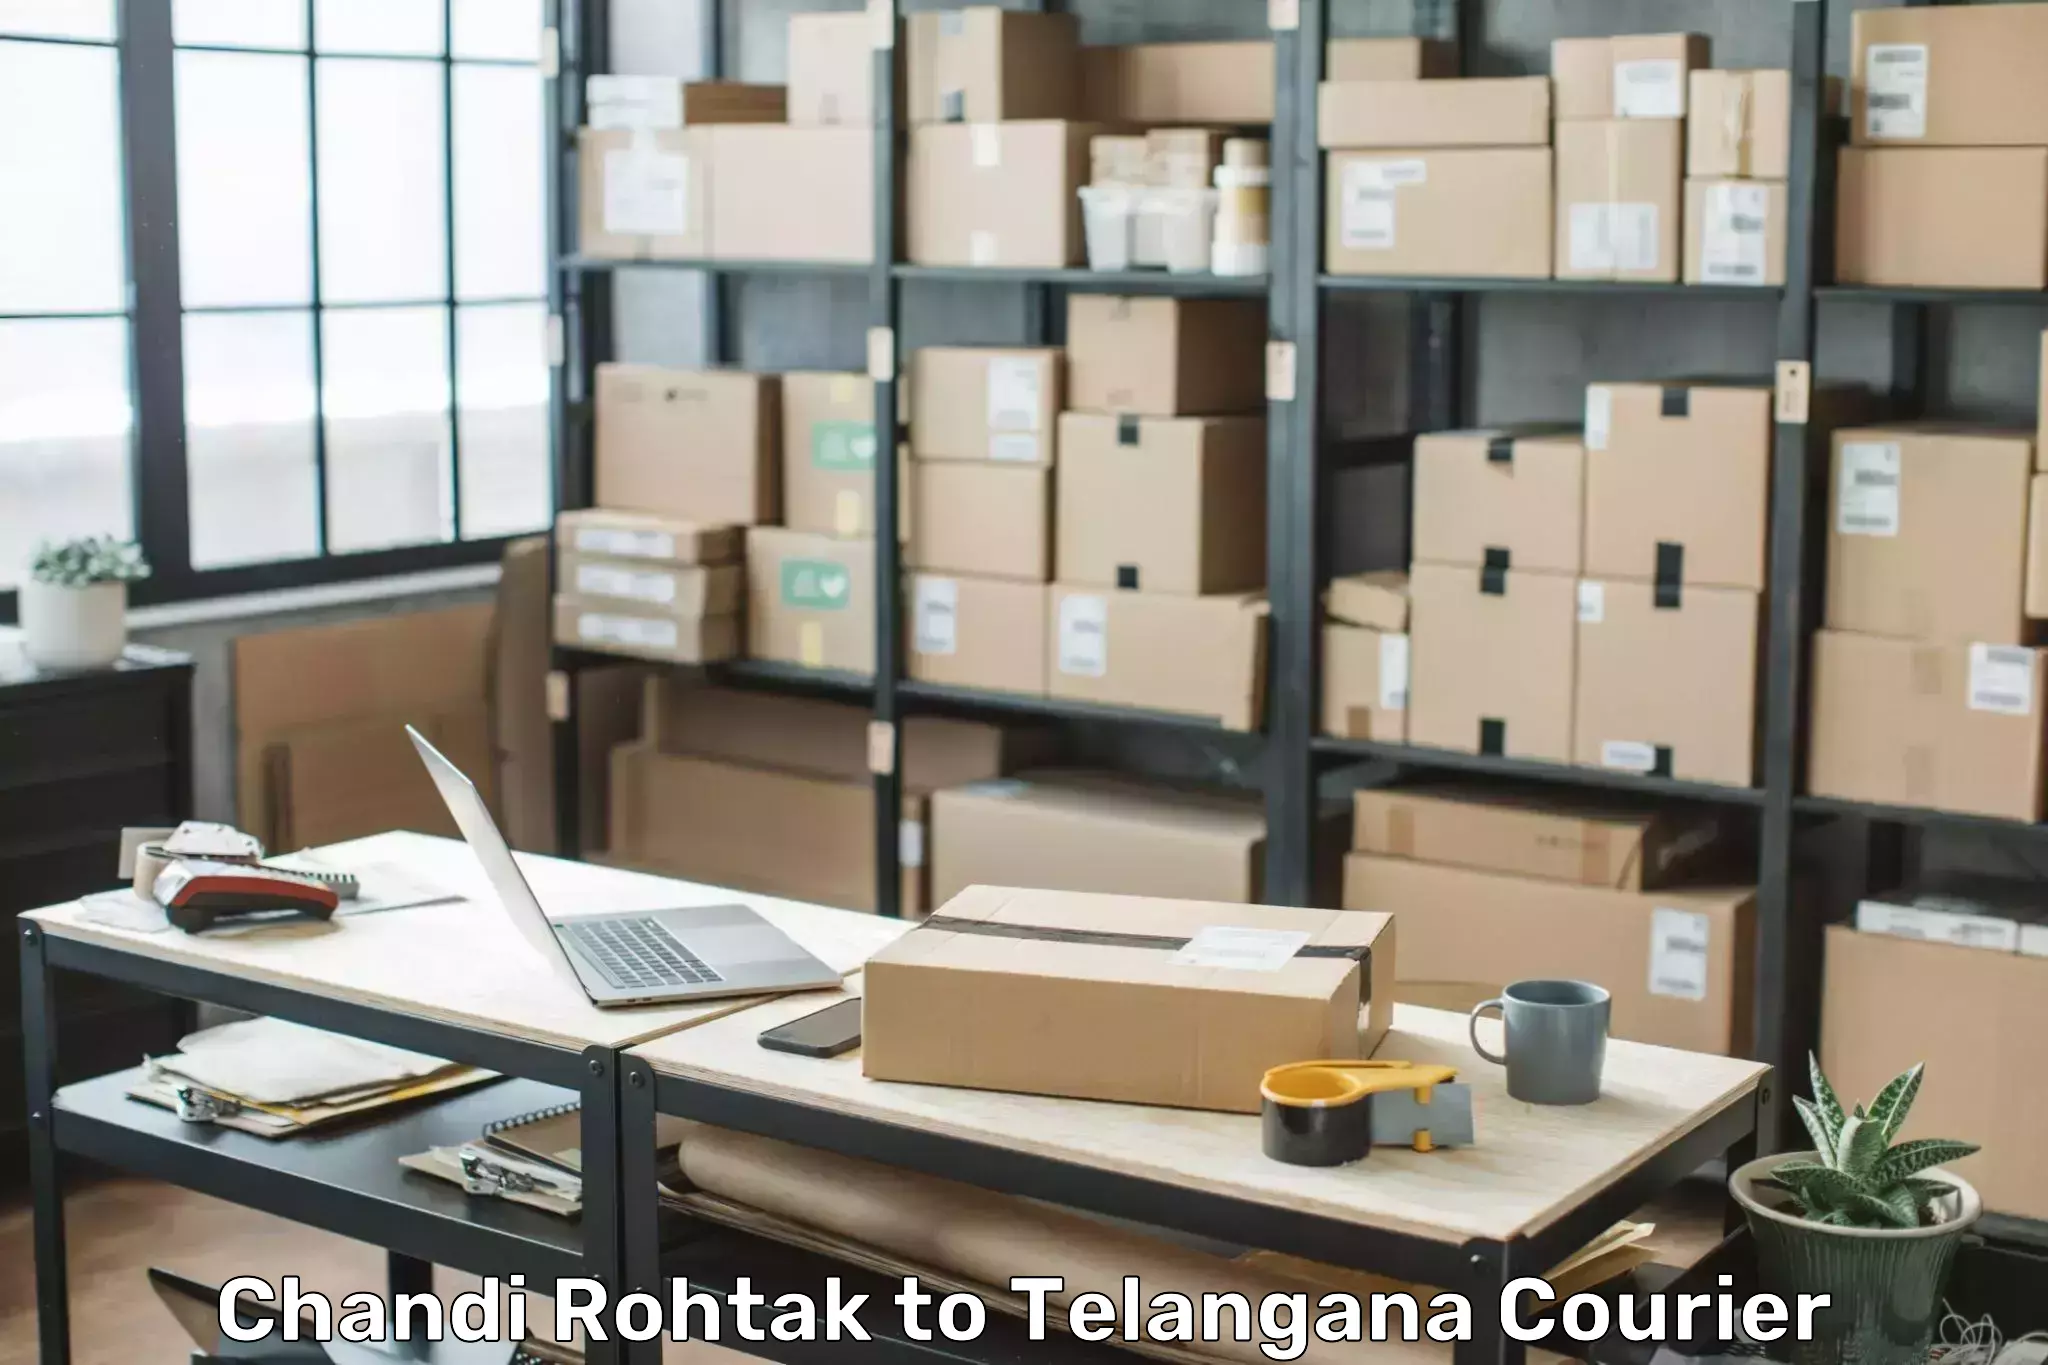 Instant baggage transport quote Chandi Rohtak to Khairatabad